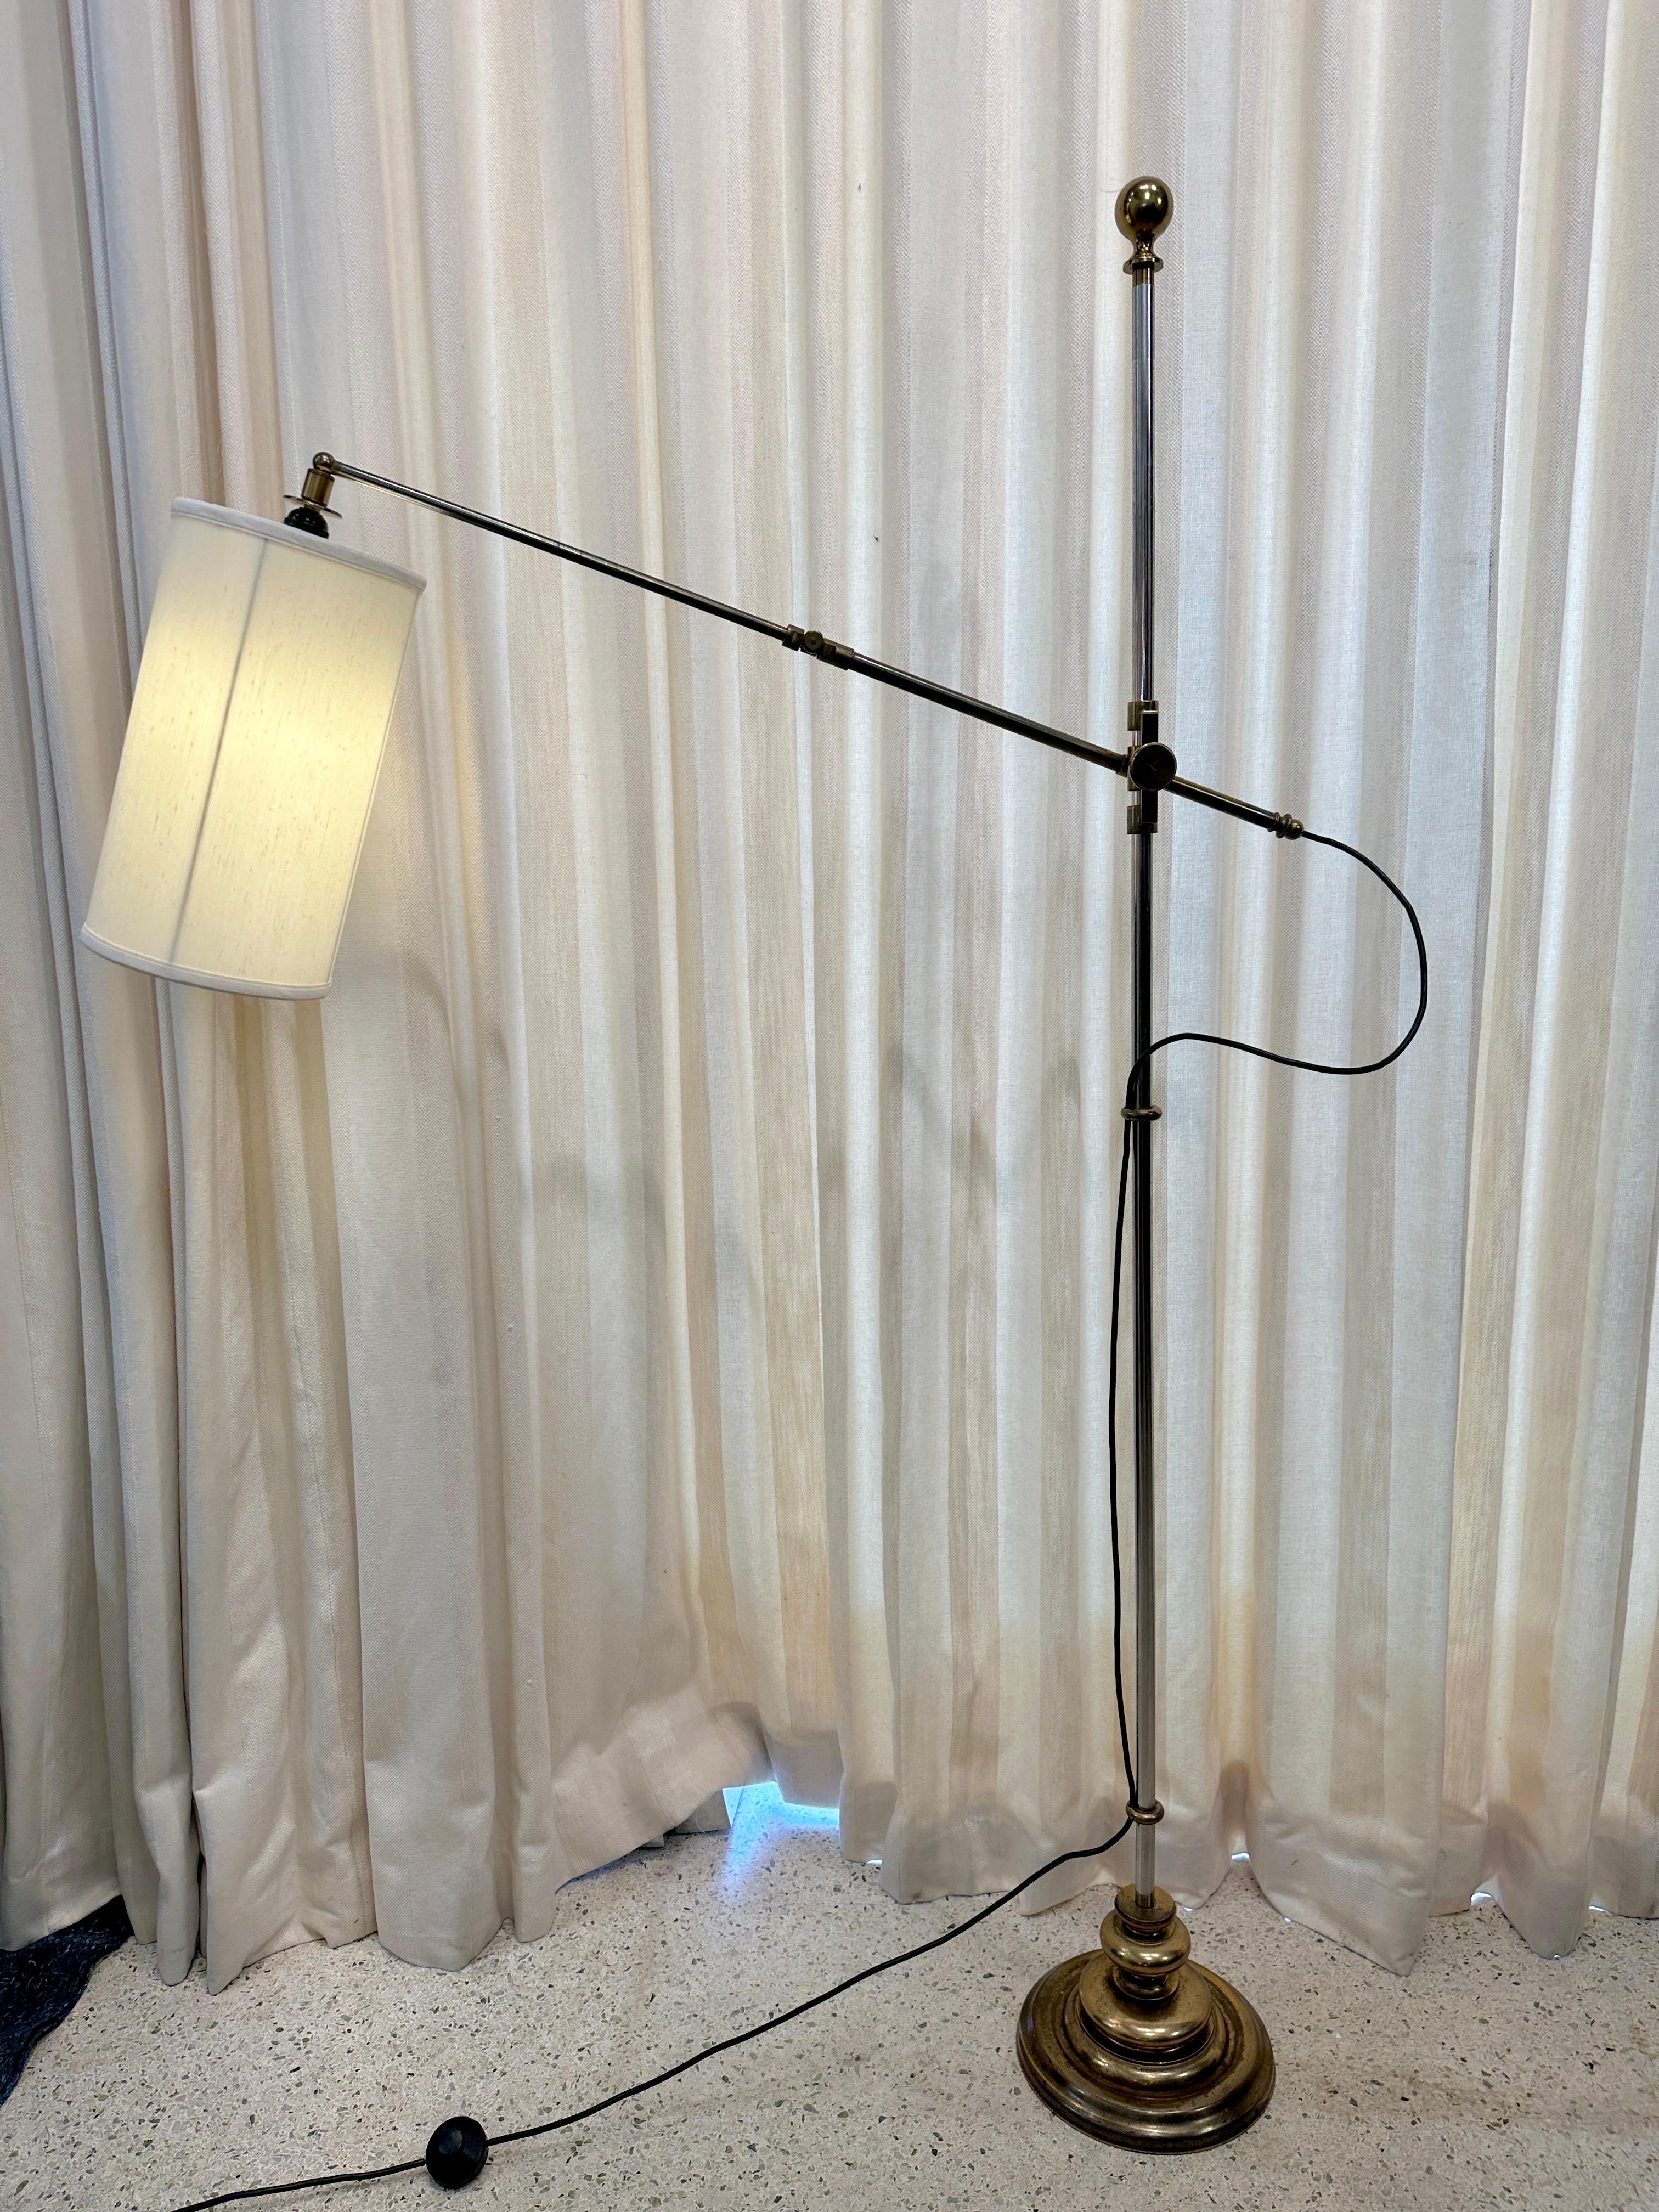 Exceptional brass and steel floor lamp from Italy.  Details abound with brass rings to stem/ body of lamp, as well as original brass ball finial. The arm extends quite far if you need, as well as the arm raises up or down in height level.  The